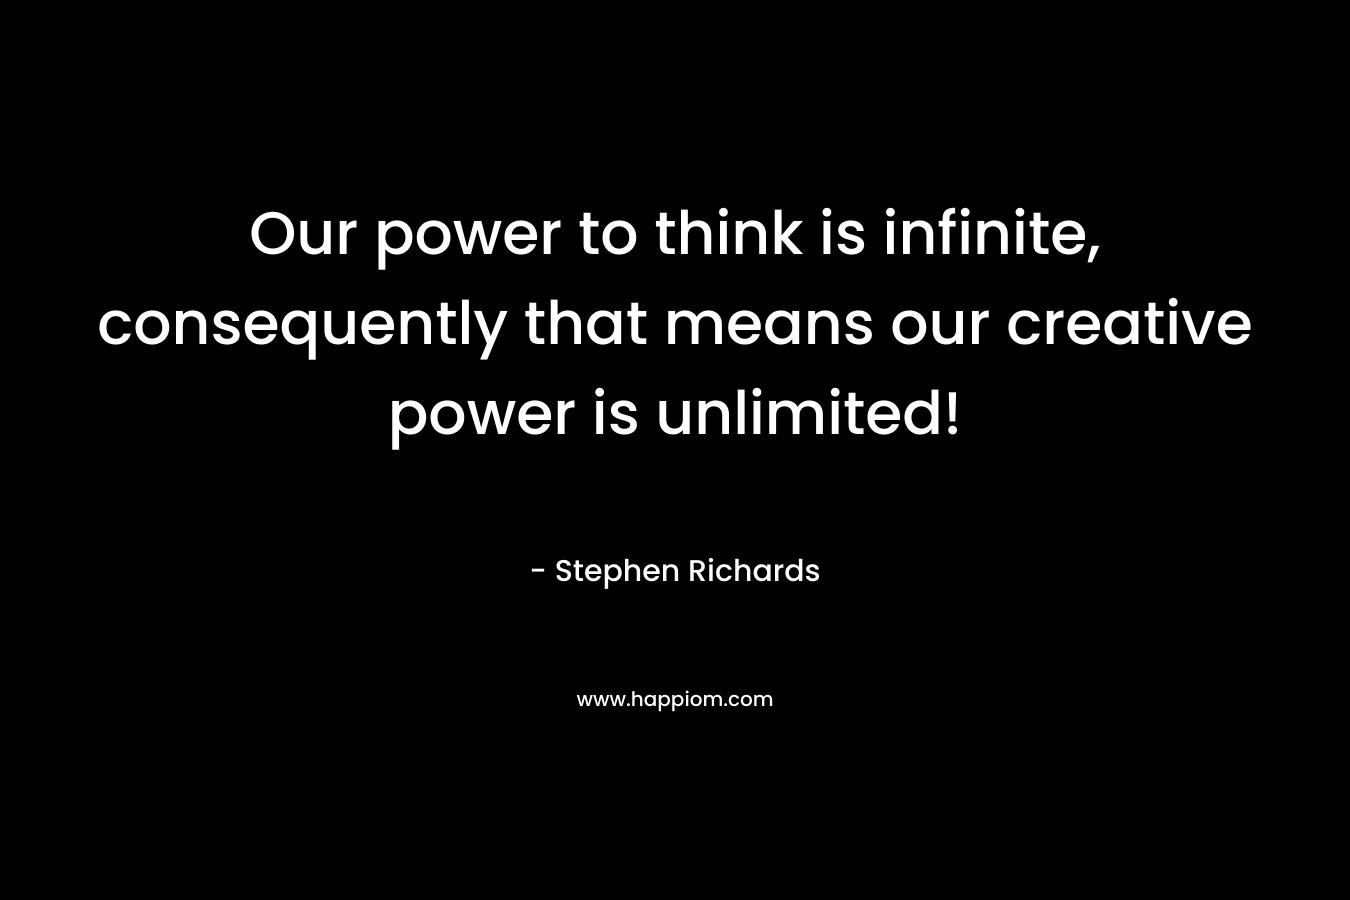 Our power to think is infinite, consequently that means our creative power is unlimited! – Stephen Richards